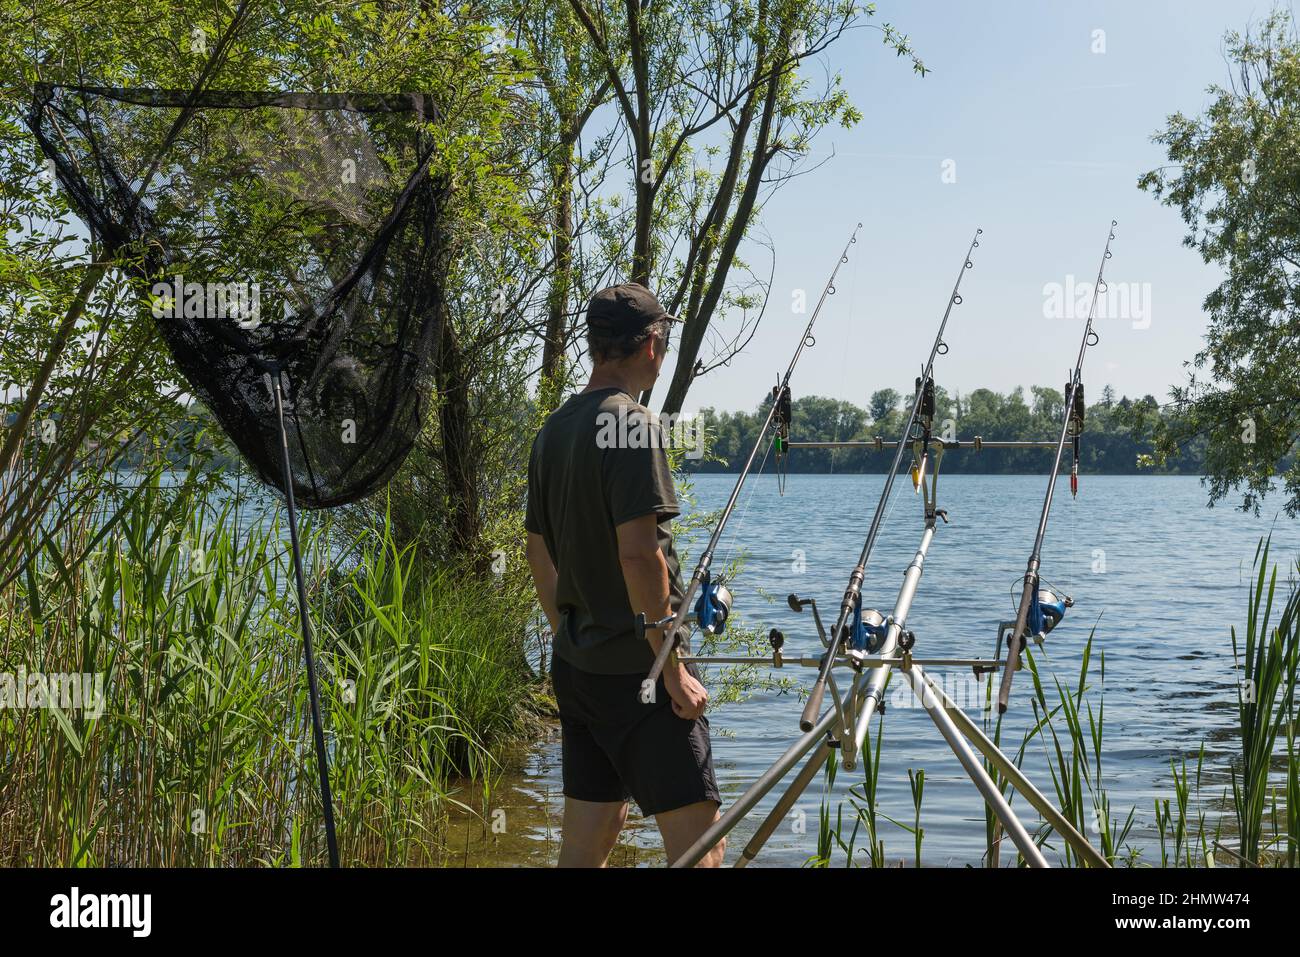 Fishing adventures, carp fishing. Concept of waiting and patience. Man fishing on the lake using modern equipment Stock Photo